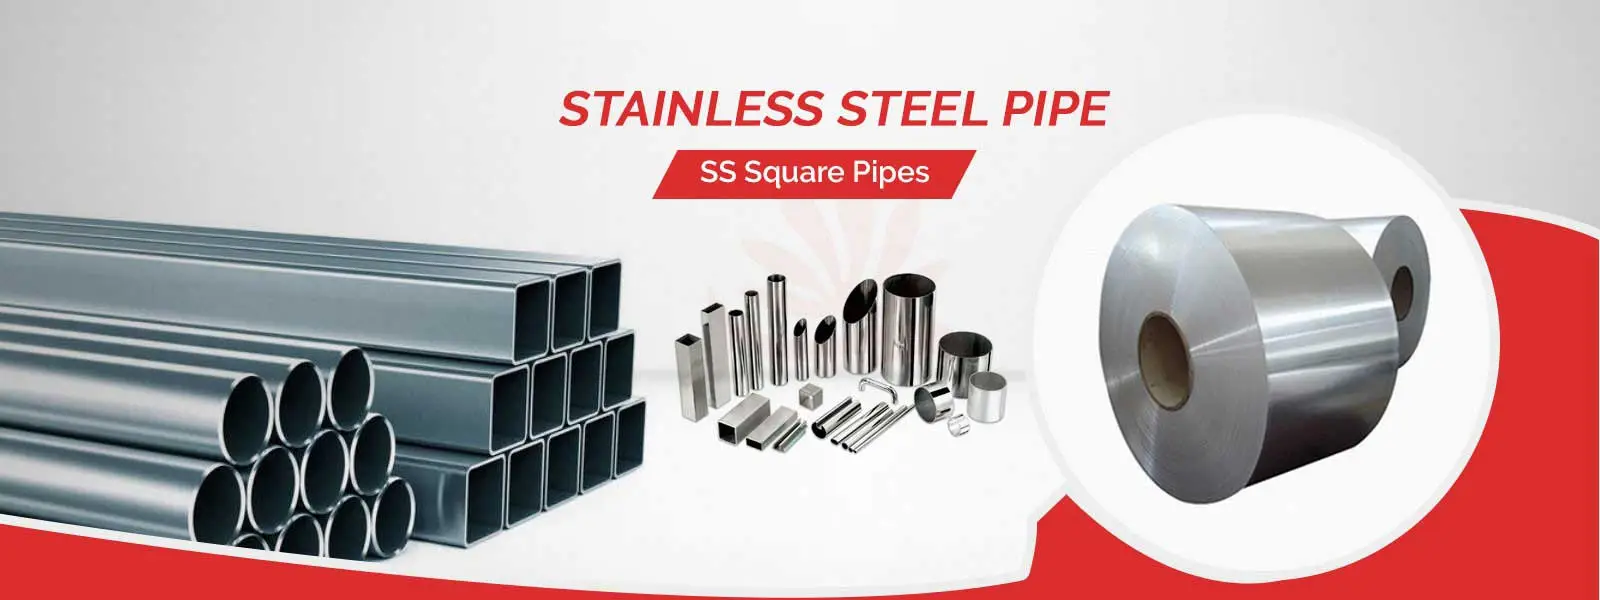 Stainless Steel Pipe Manufacturers in Kolkata